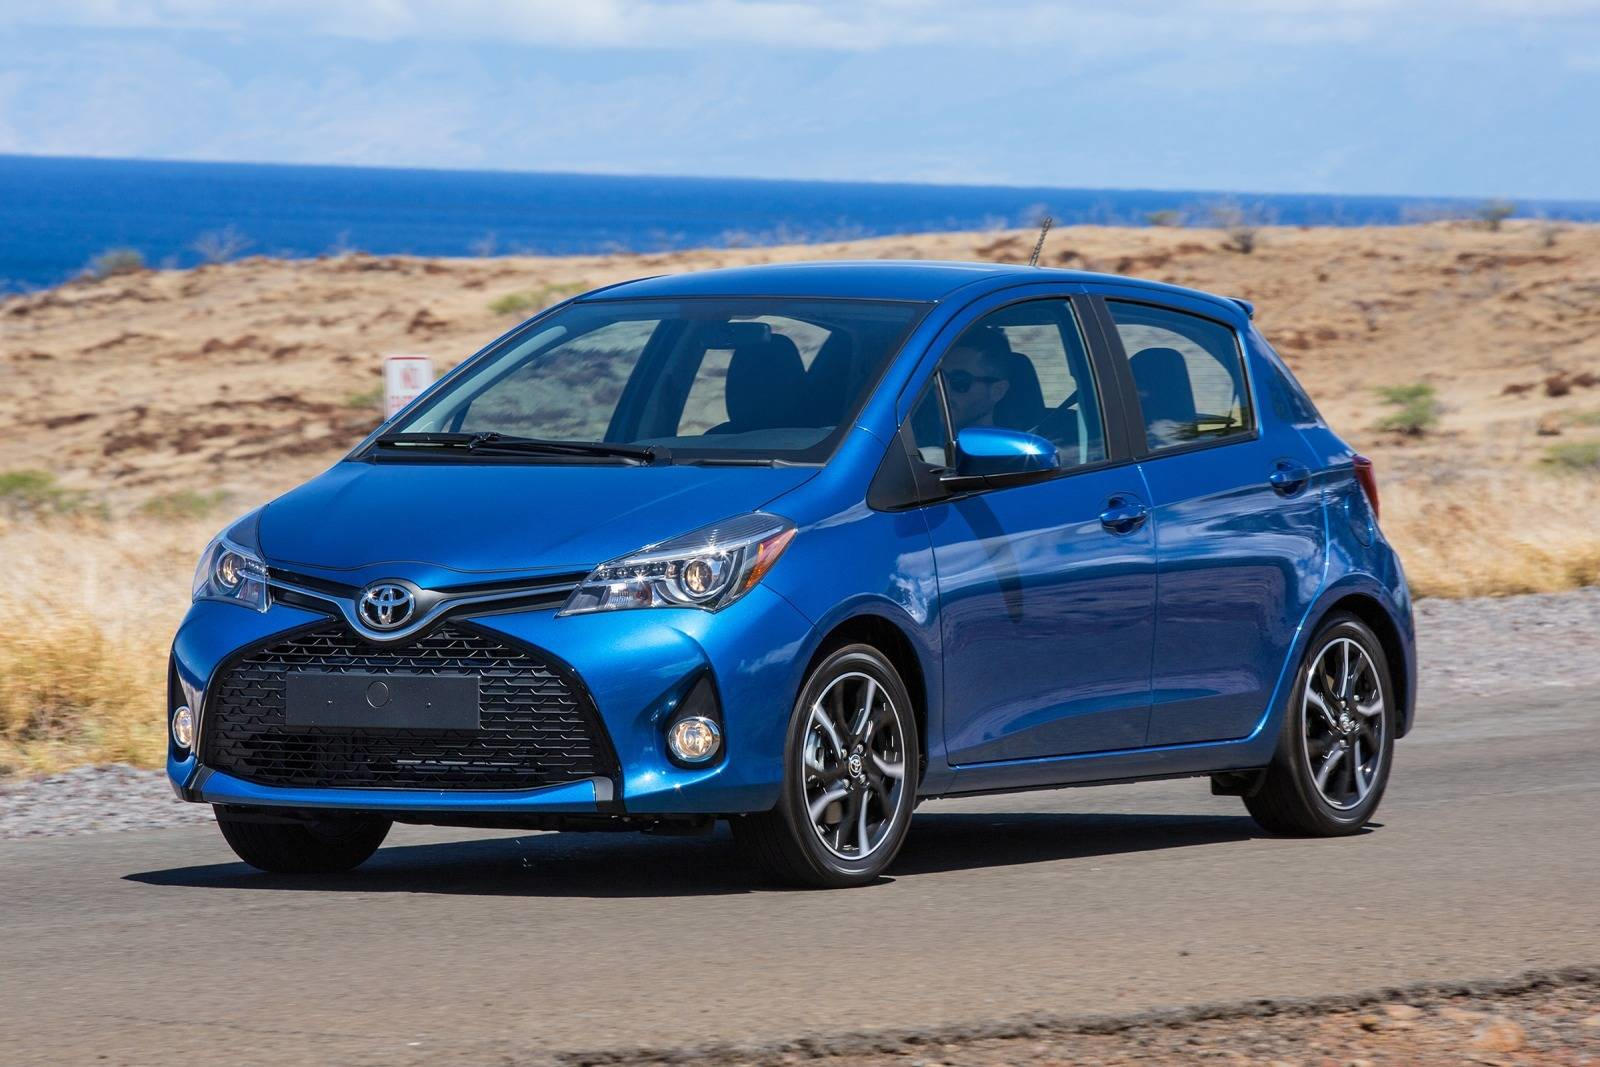 Toyota Yaris Hatchback History. Evolution and changes